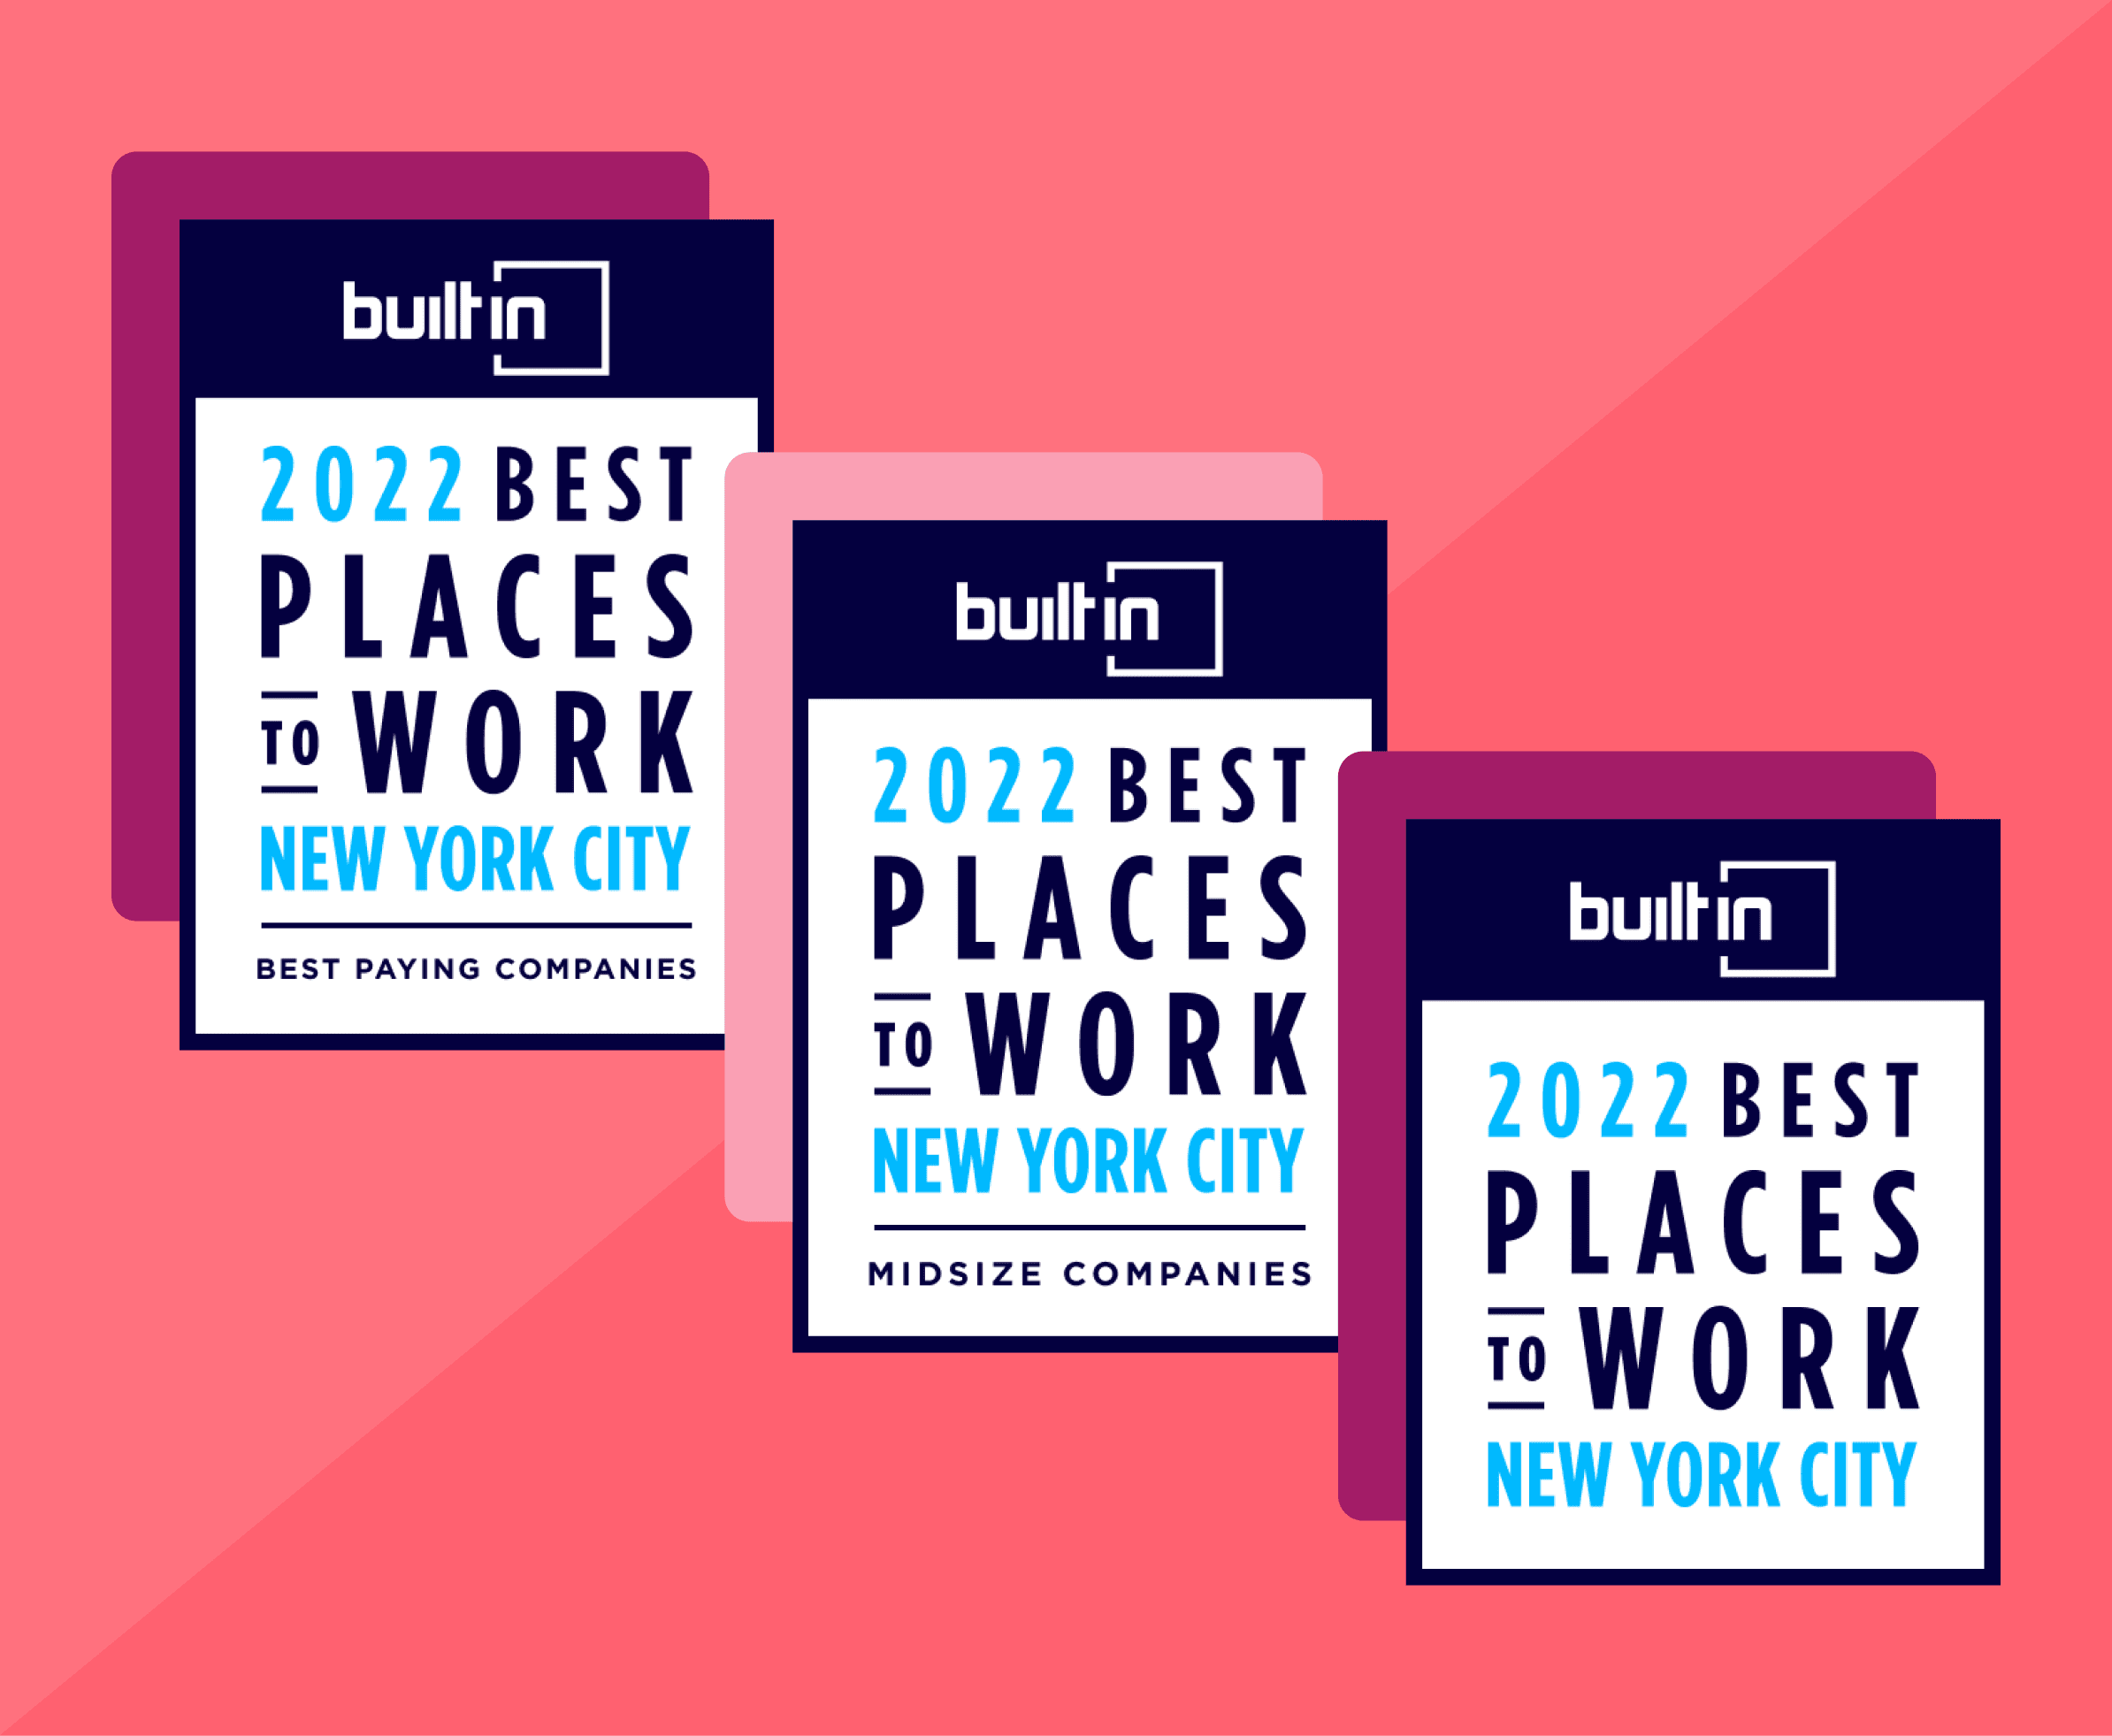 Best places to work builtin 2022